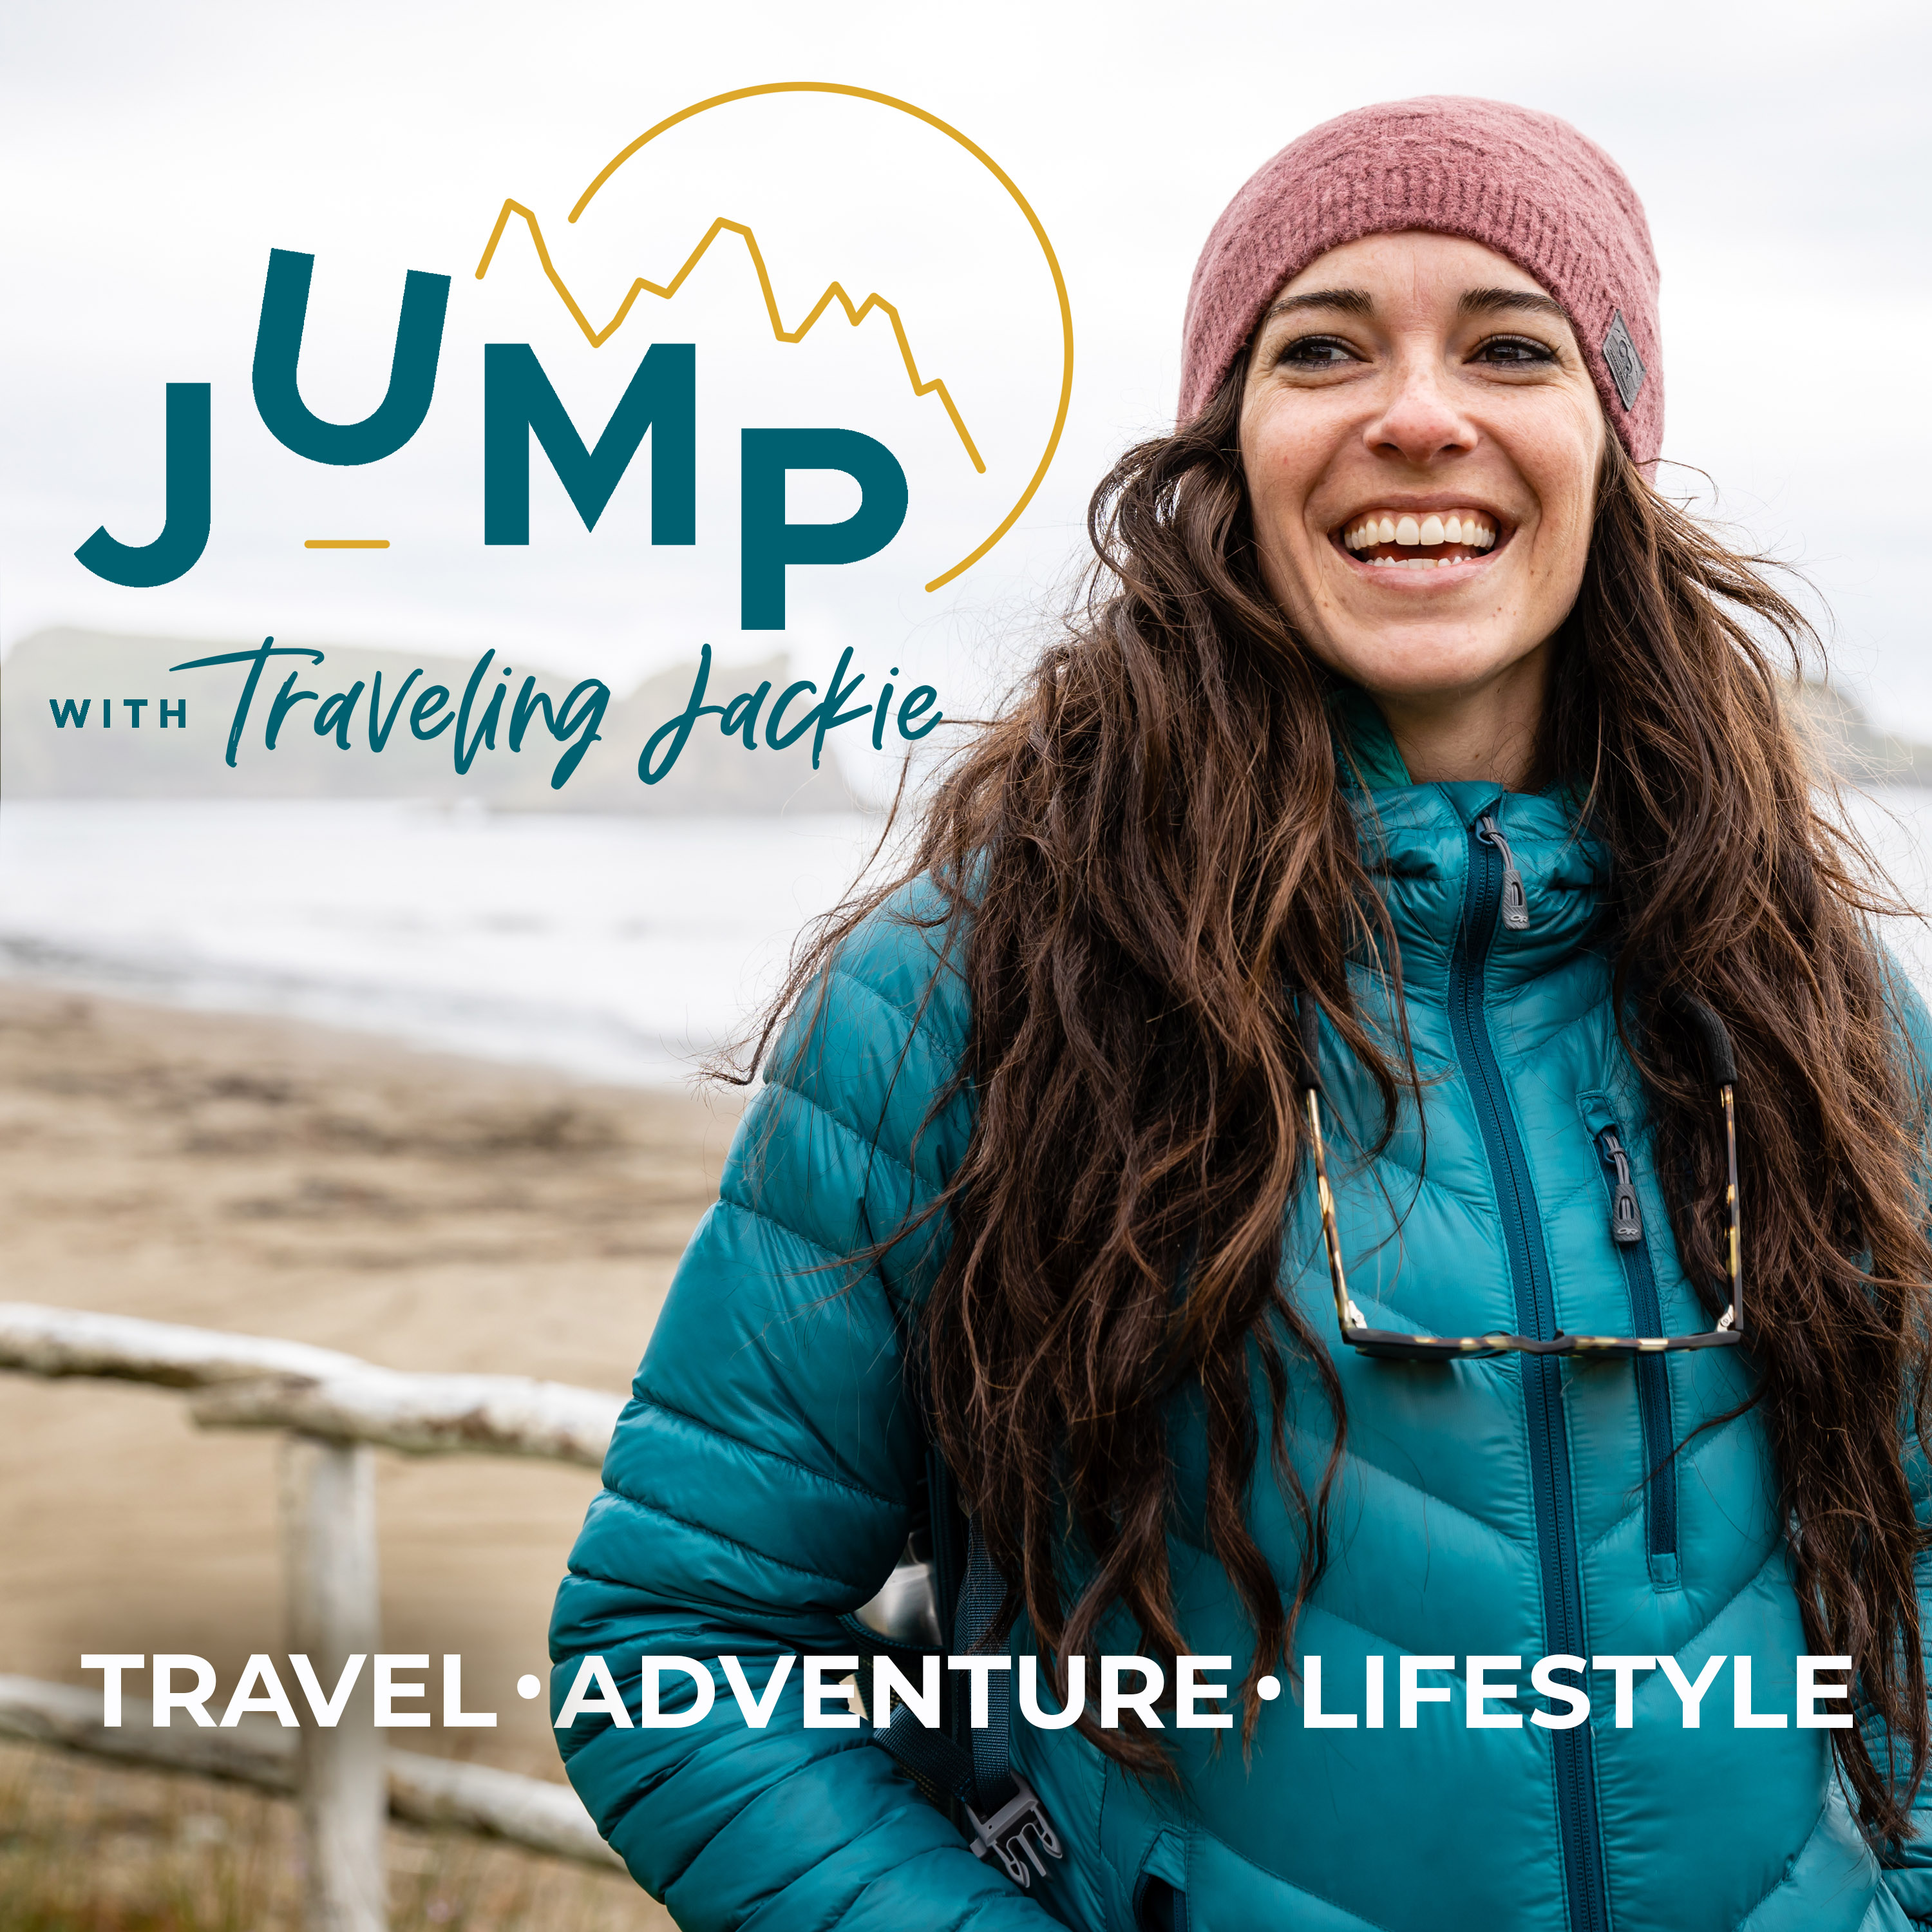 JUMP 138: Travel by Trail Run - Strong Mind, Light Pack, Good Plan